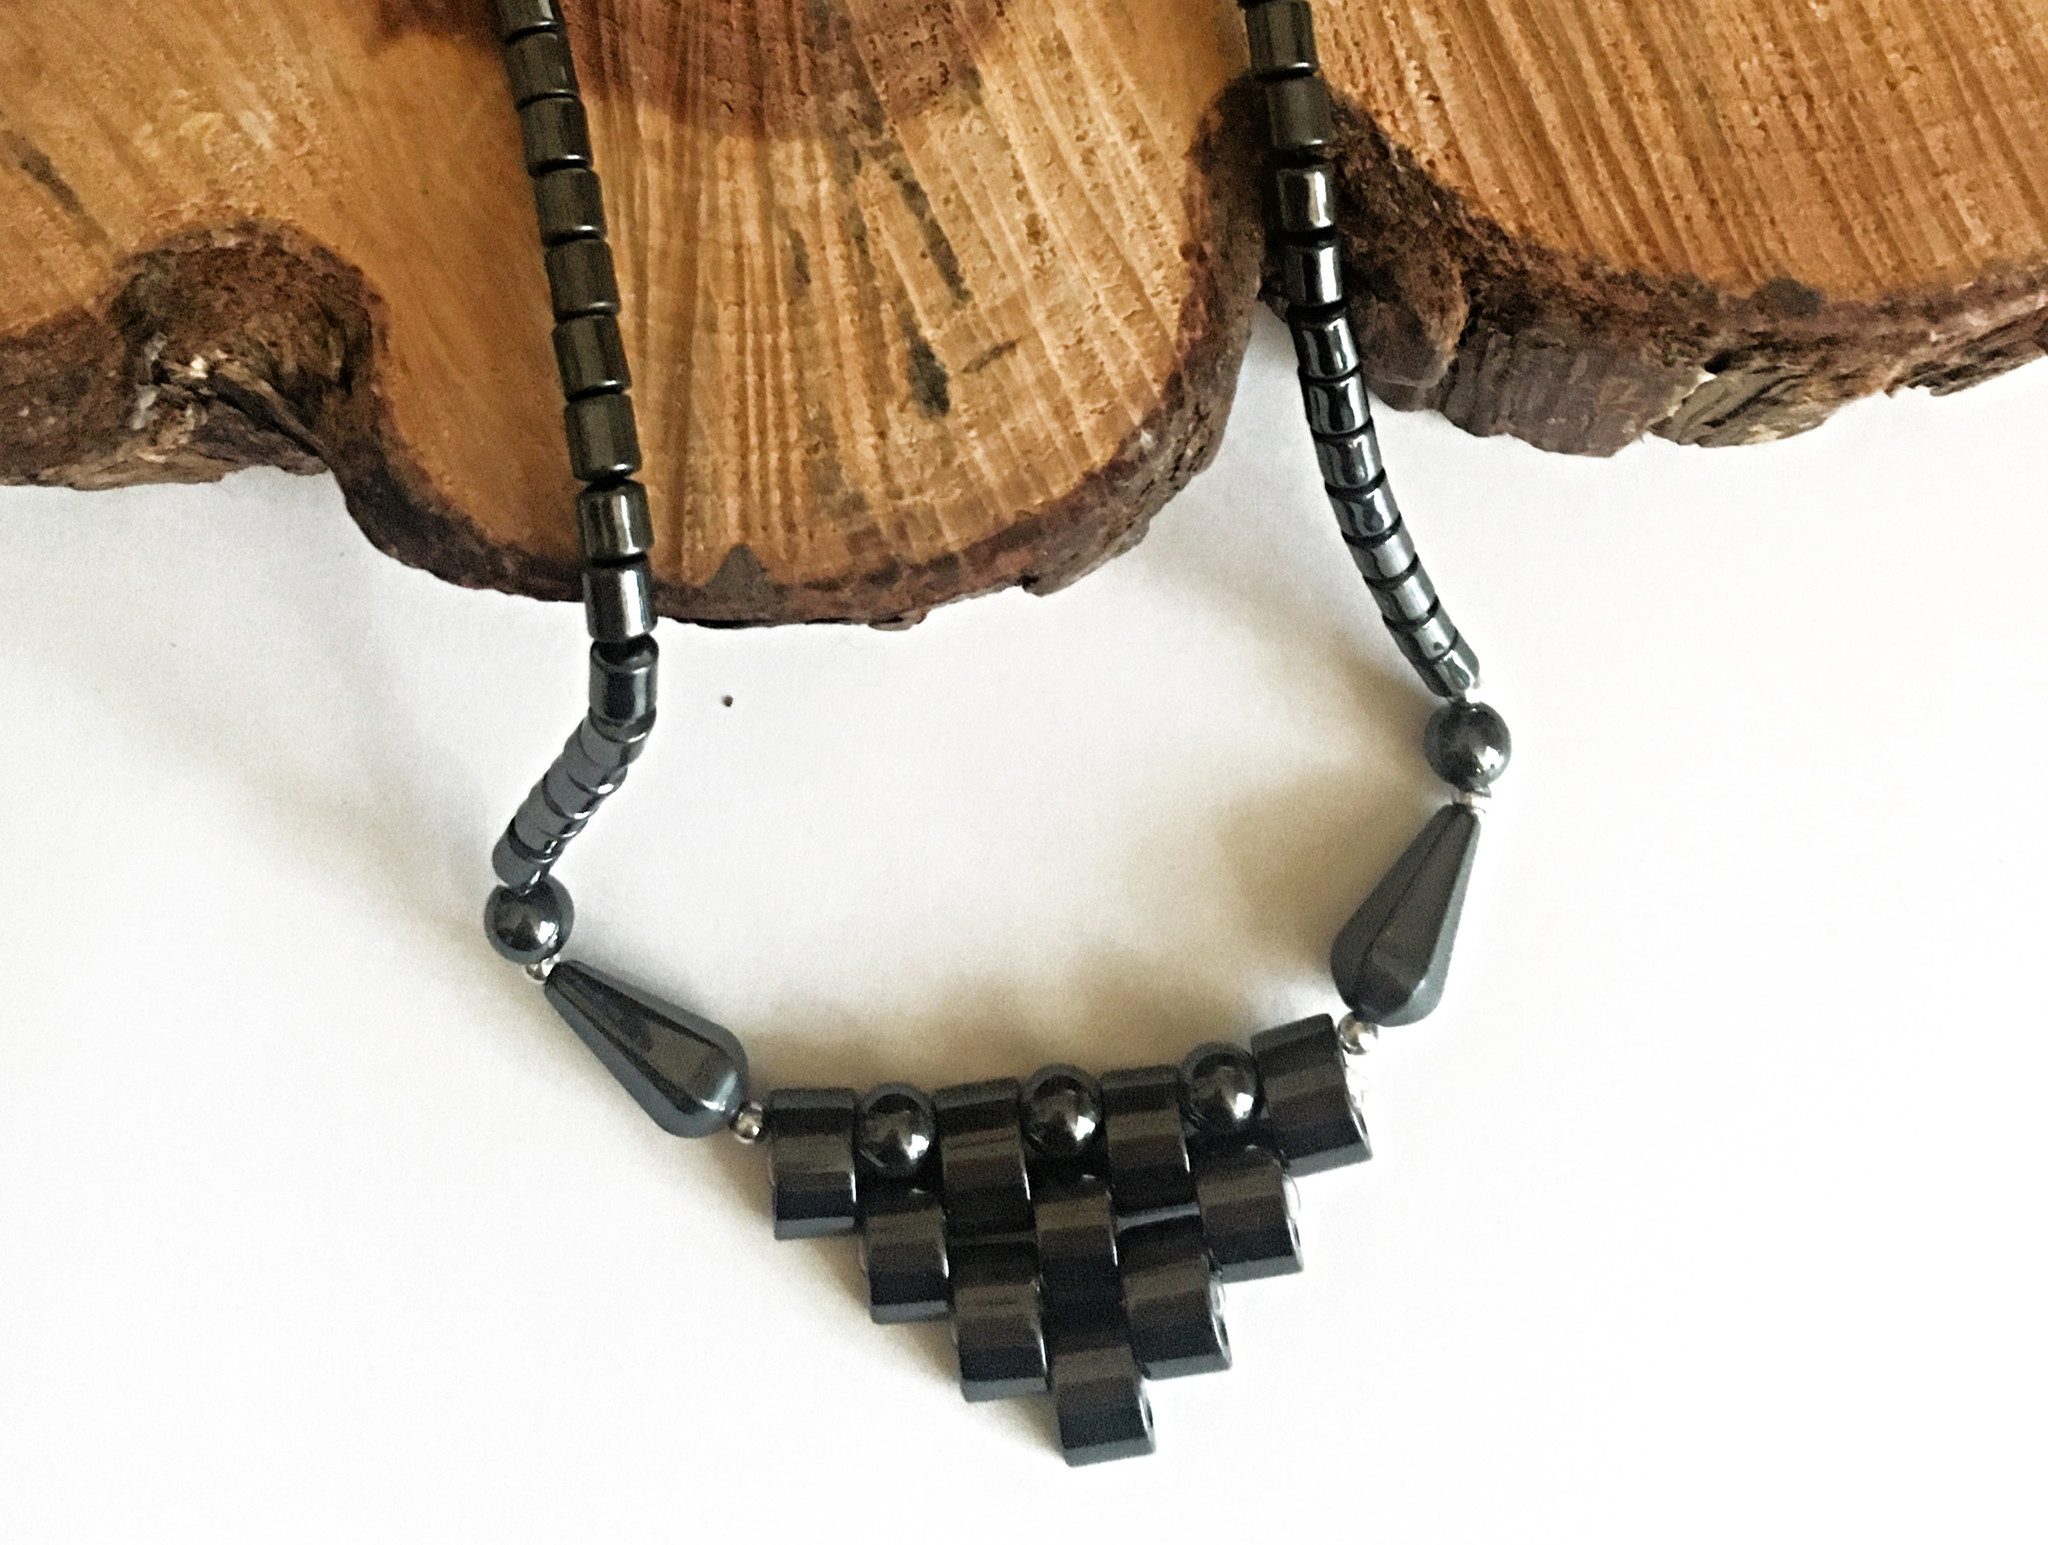 Magnetic Hematite Bead Necklace - Handcrafted Natural Stone Jewelry &  Unique Gifts - KVK Designs